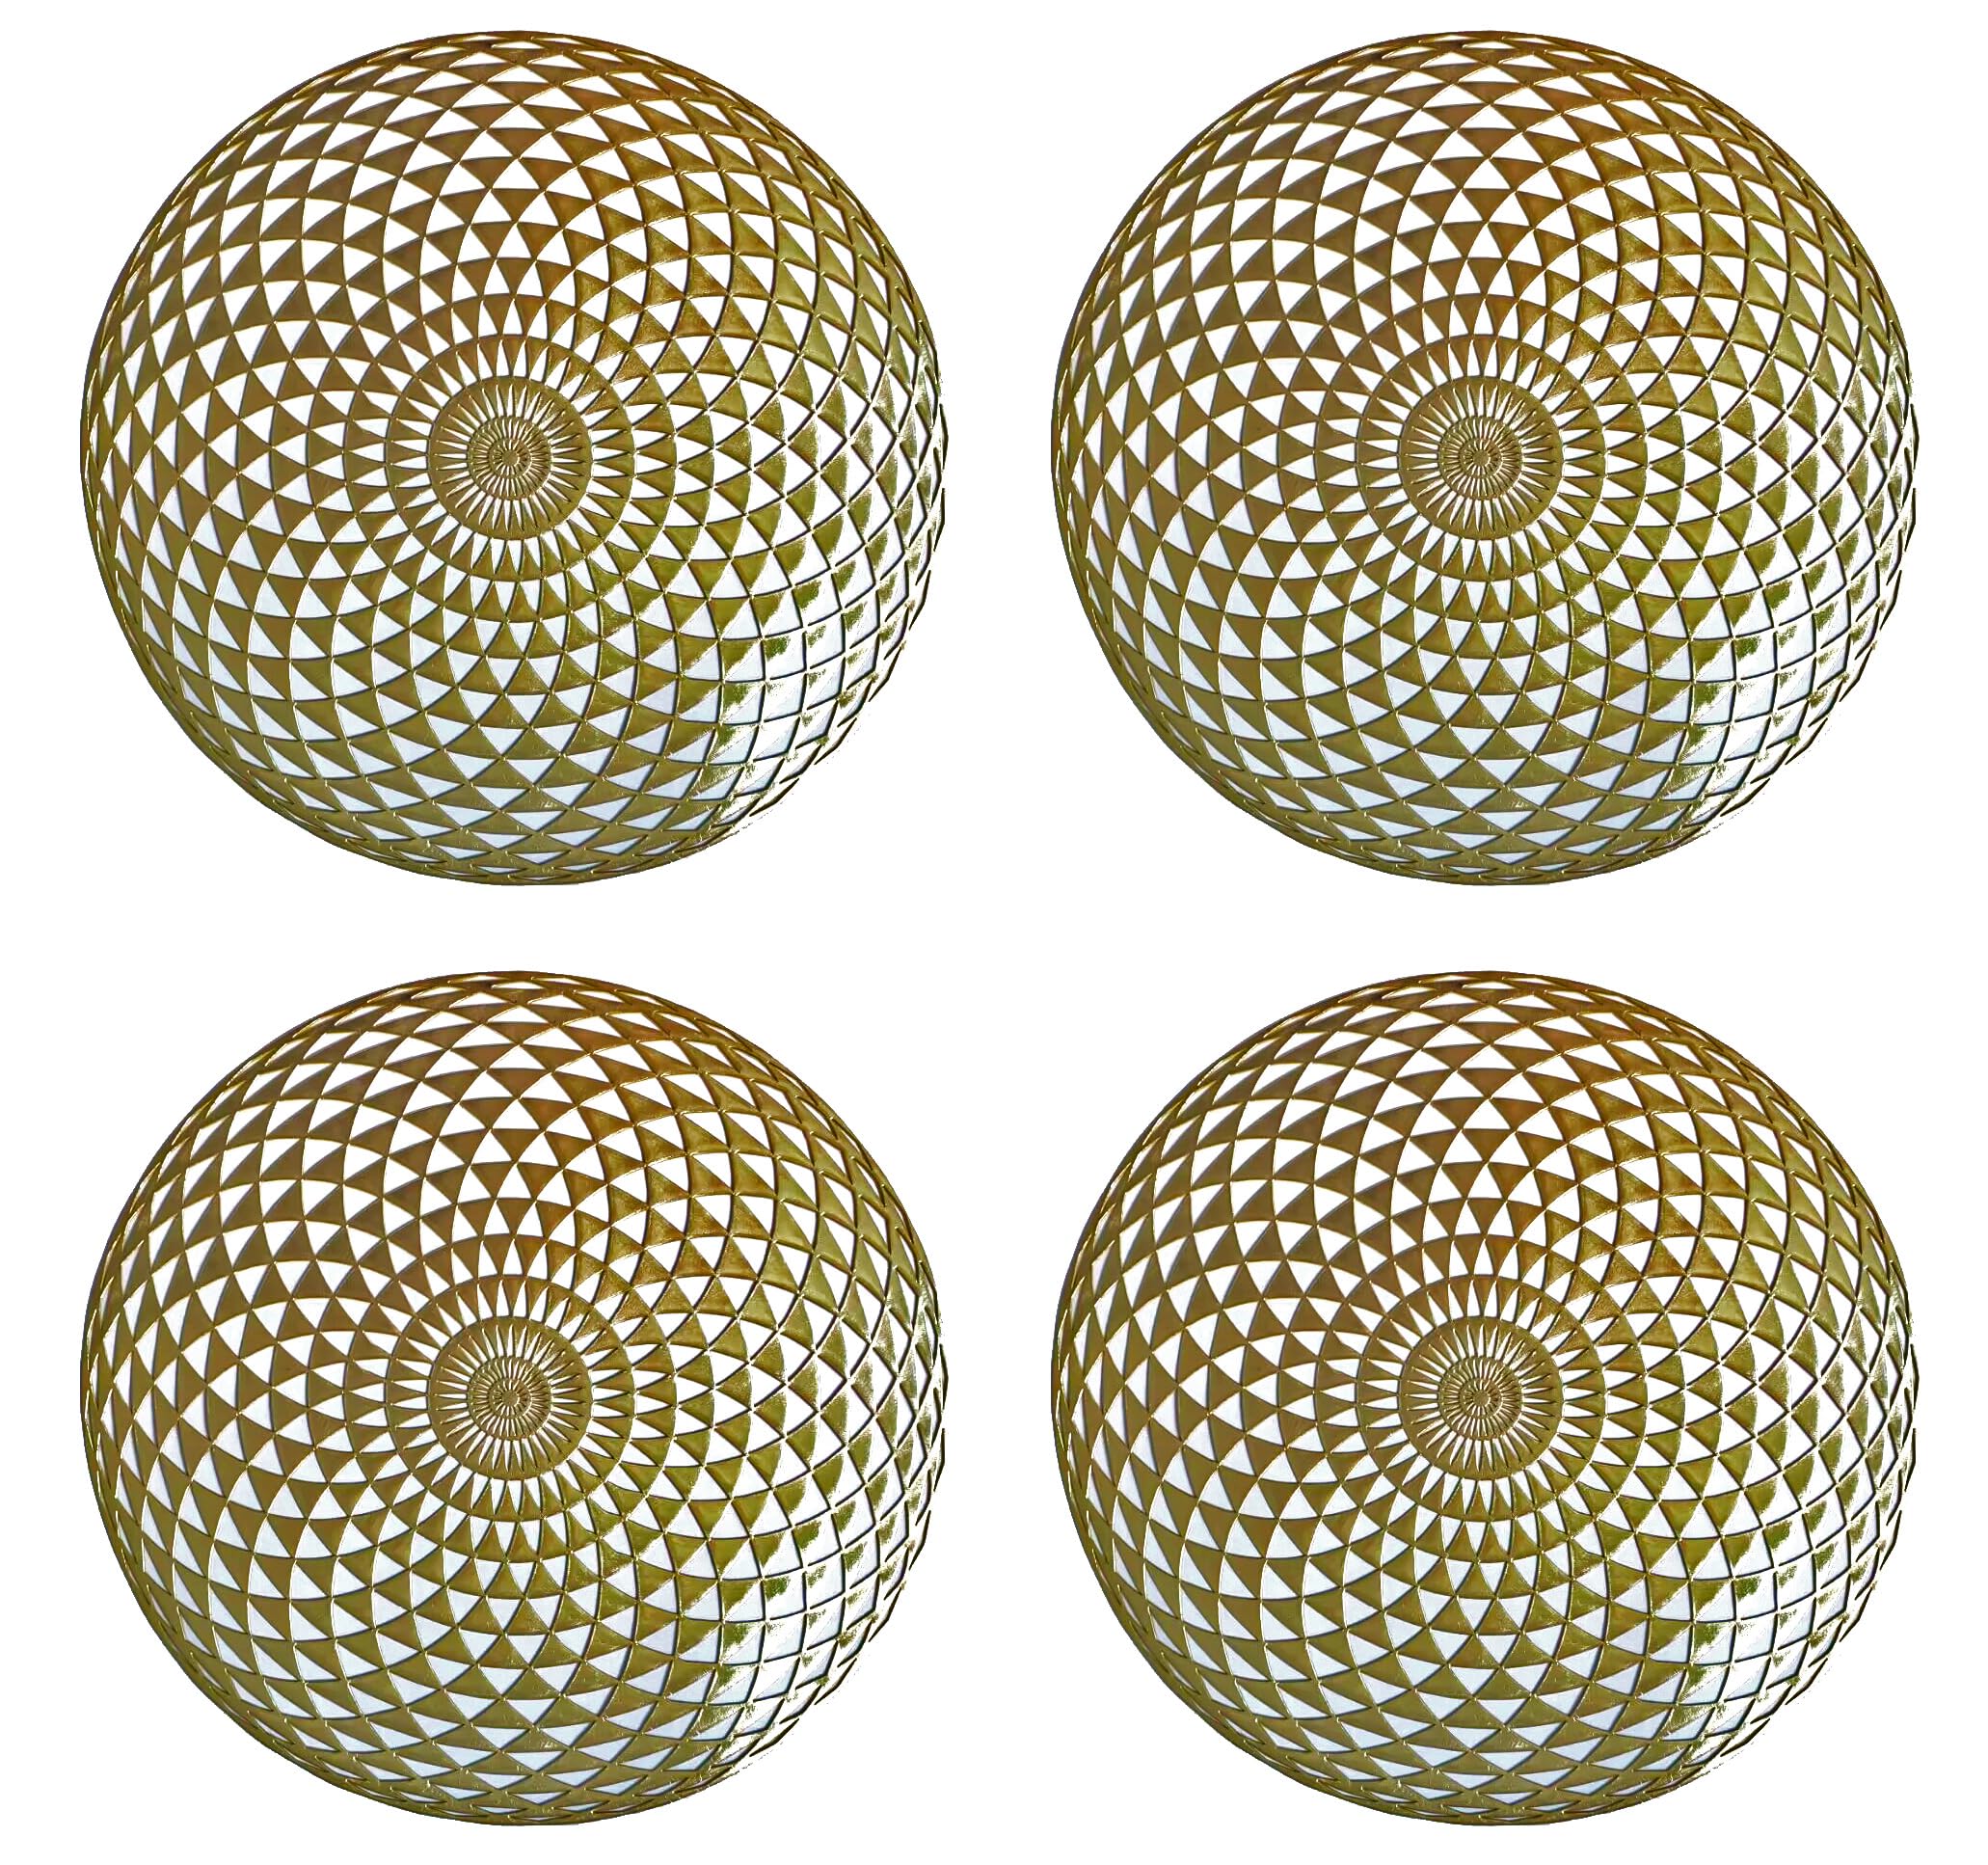 Metallic Placemats Set of 4 - Easy to Clean, Washable Decorative Place Mats for Kitchen and Dining Table - Non-Slip Round Table Mats - Dinnerware & Accessories - Dining Table Centerpiece Decor, Gold